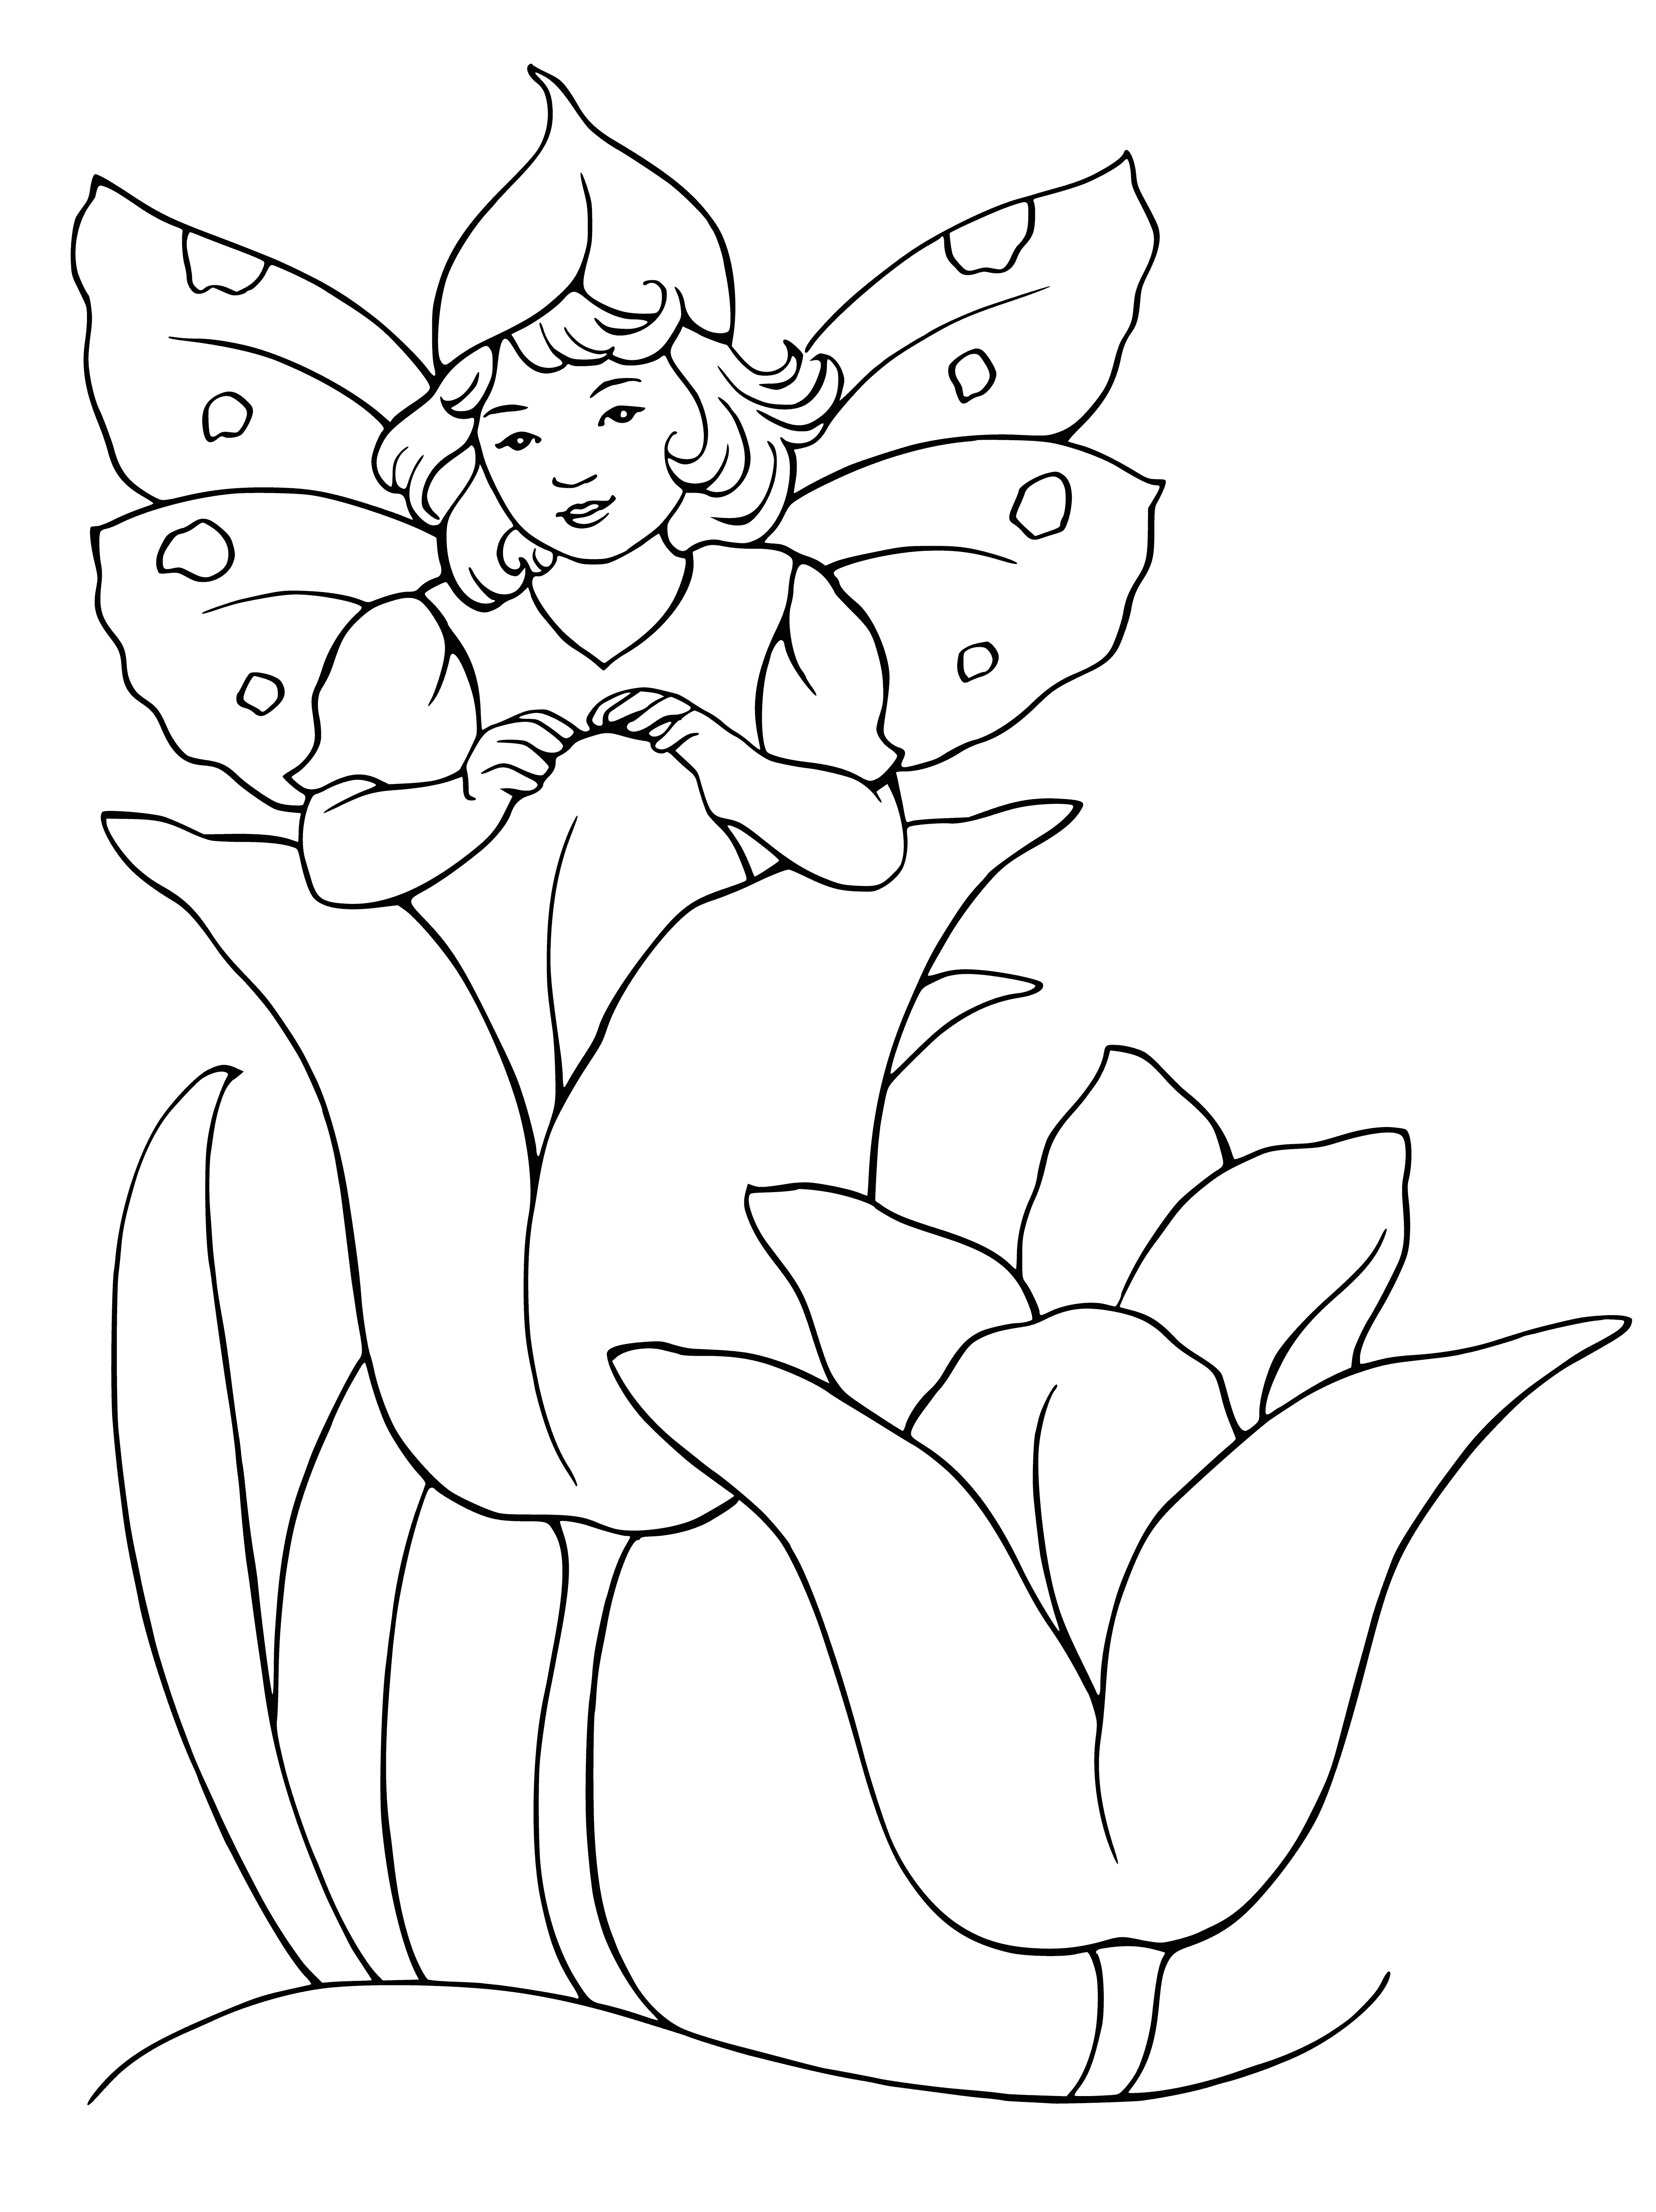 coloring page: A delicate fairy with light wings atop a large flower in a green dress and circlet, looking off to the side lost in thought.